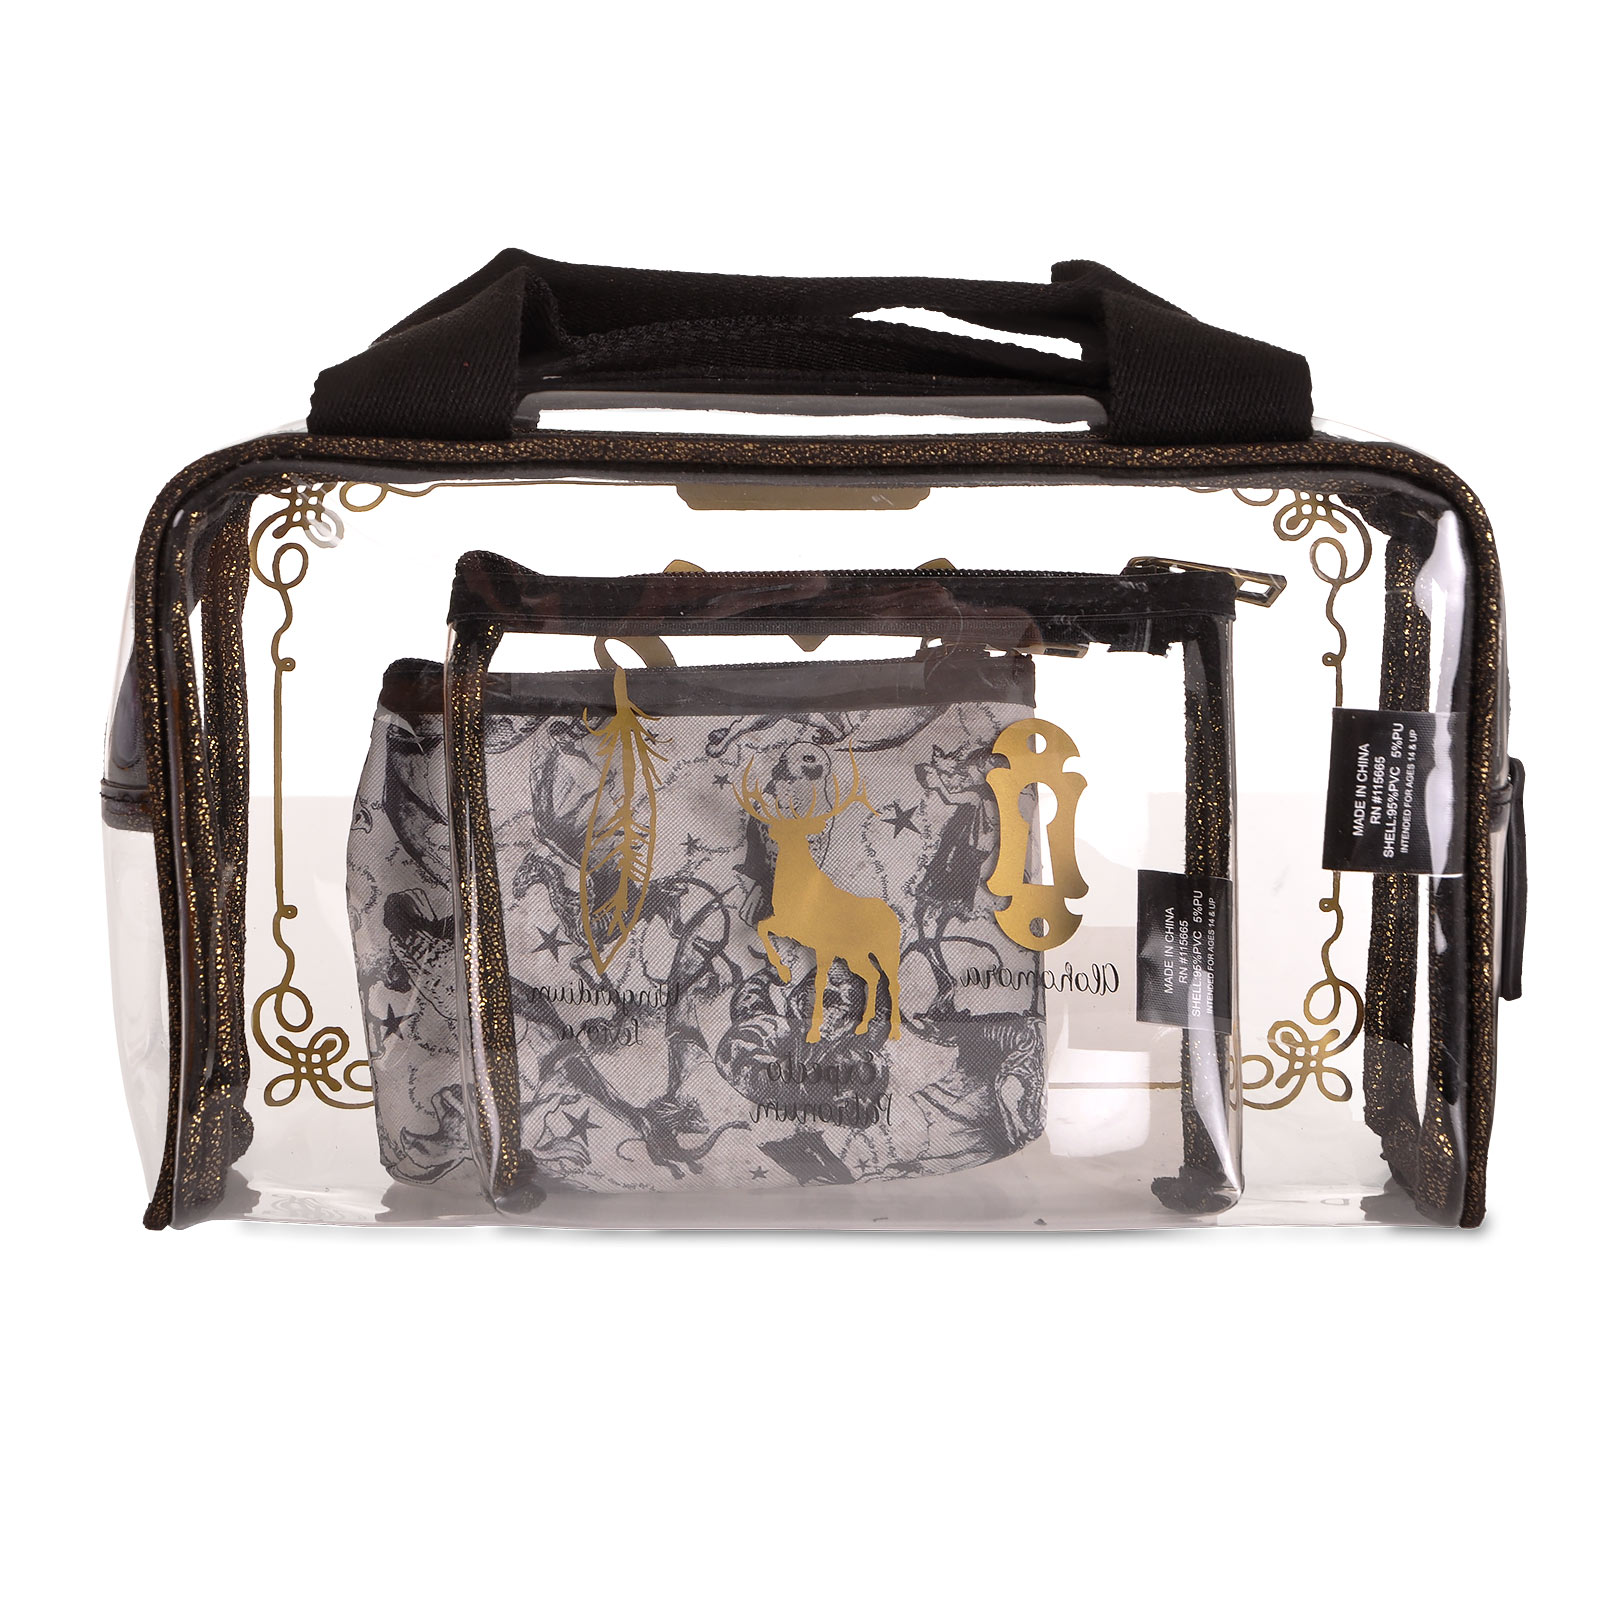 Harry Potter - Hogwarts Toiletry Bags Set of 3